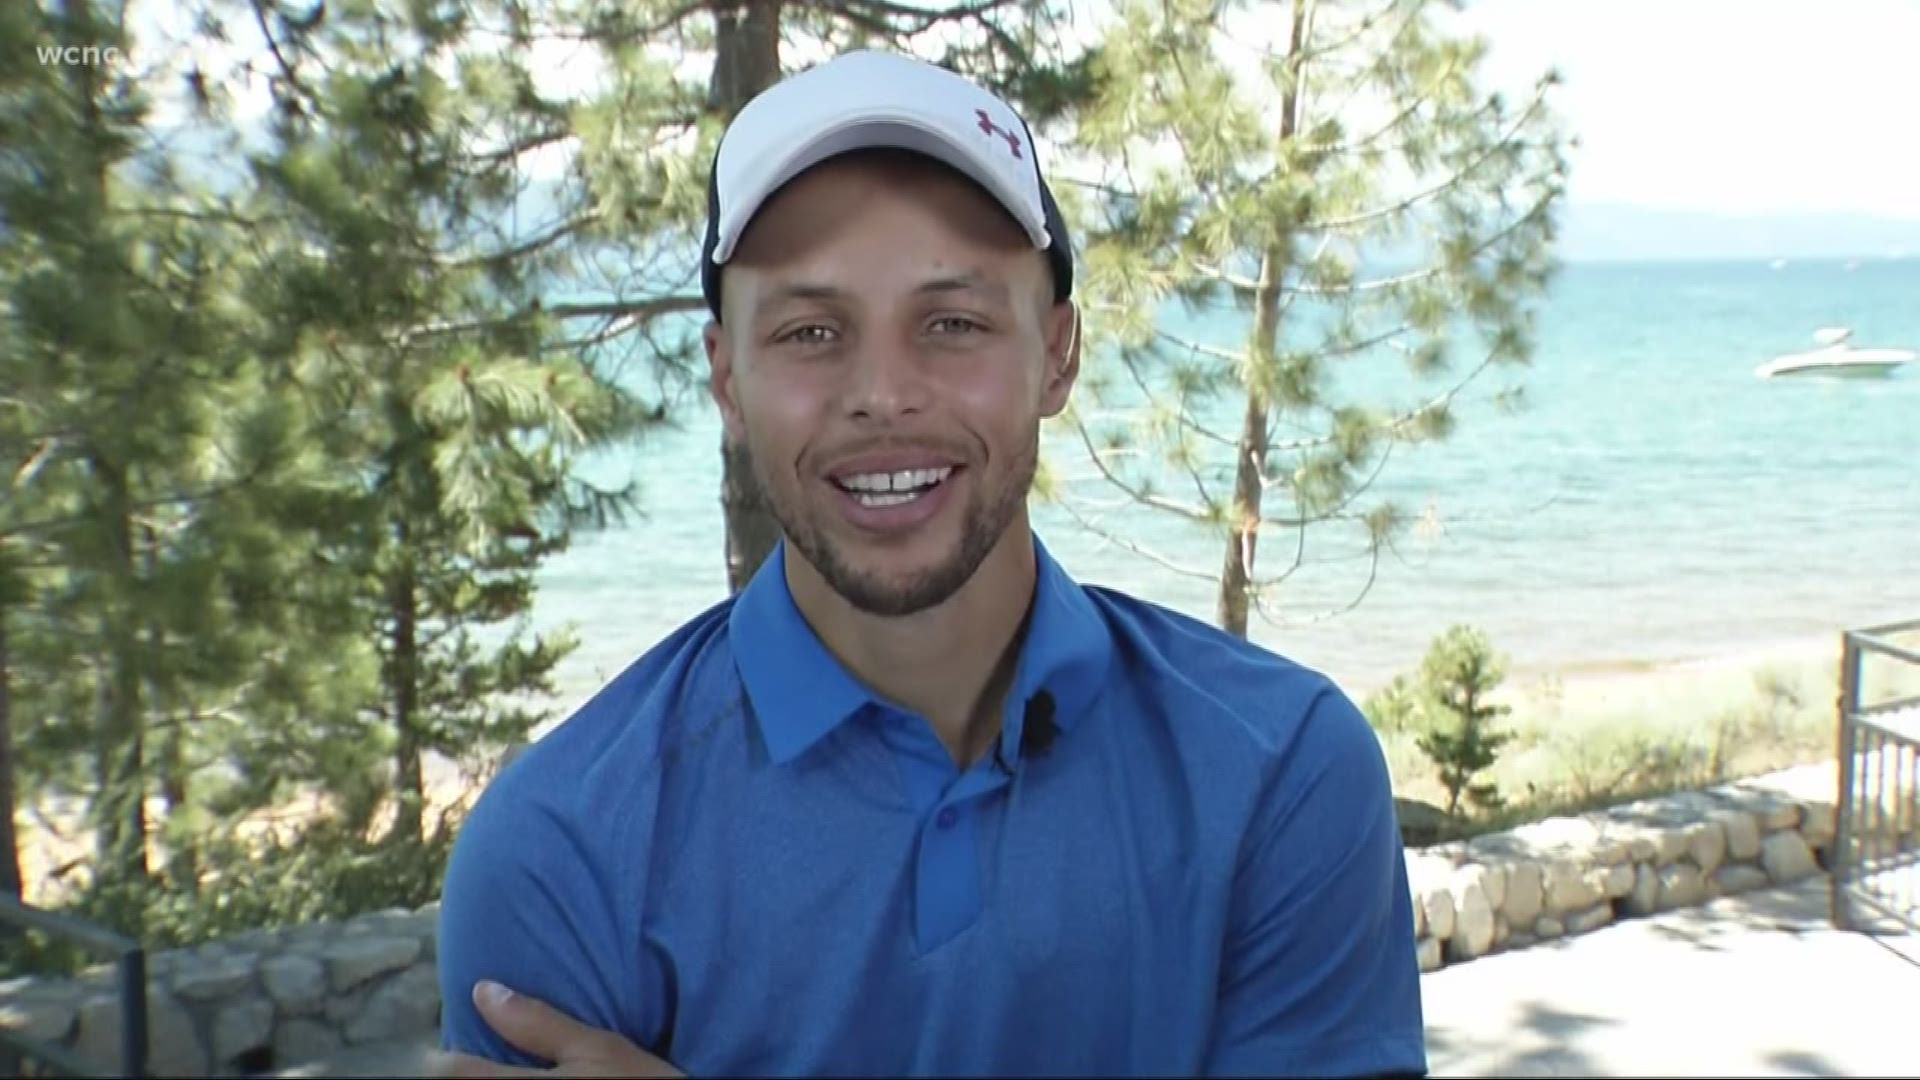 Steph Curry sat down for a one-on-one interview with NBC Charlotte Sports Director Nick Carboni.